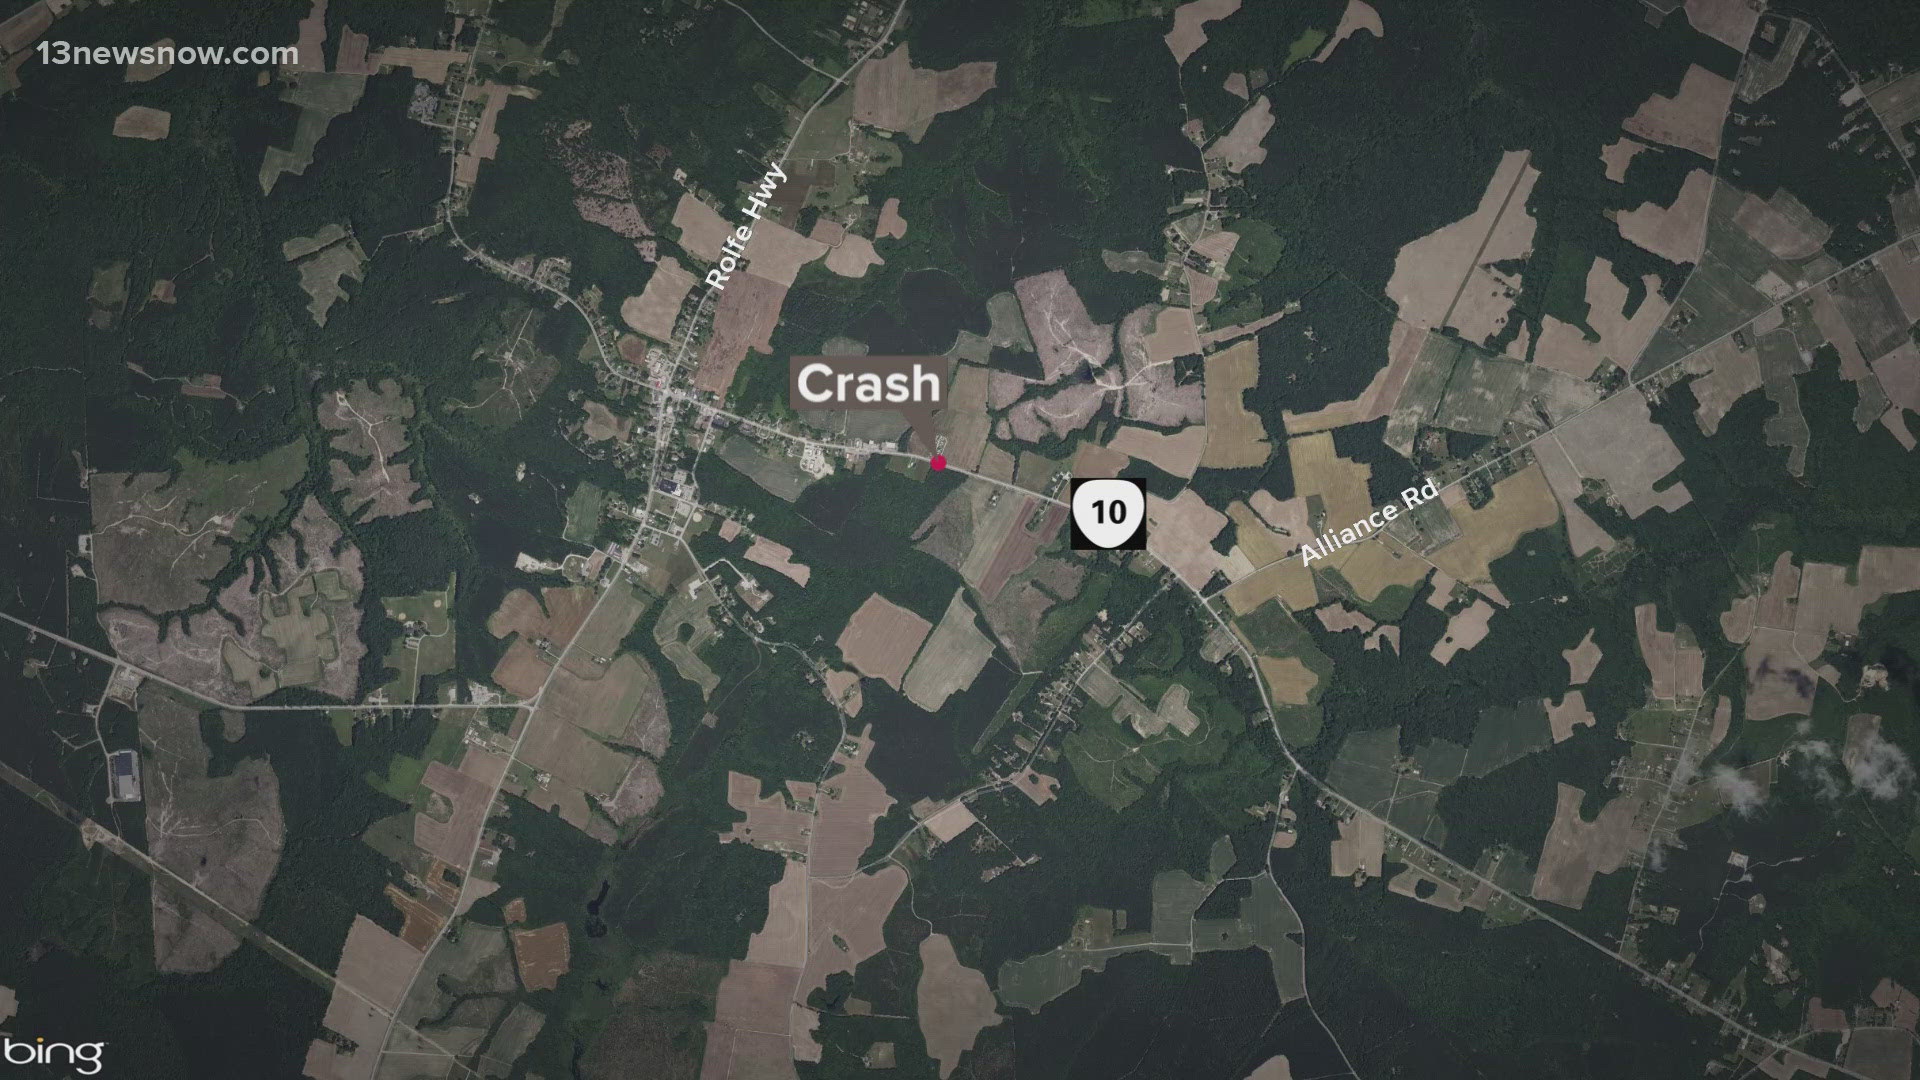 The crash happened just after 4 a.m. on Route 10 near Magnolia Circle, outside the Town of Surry.